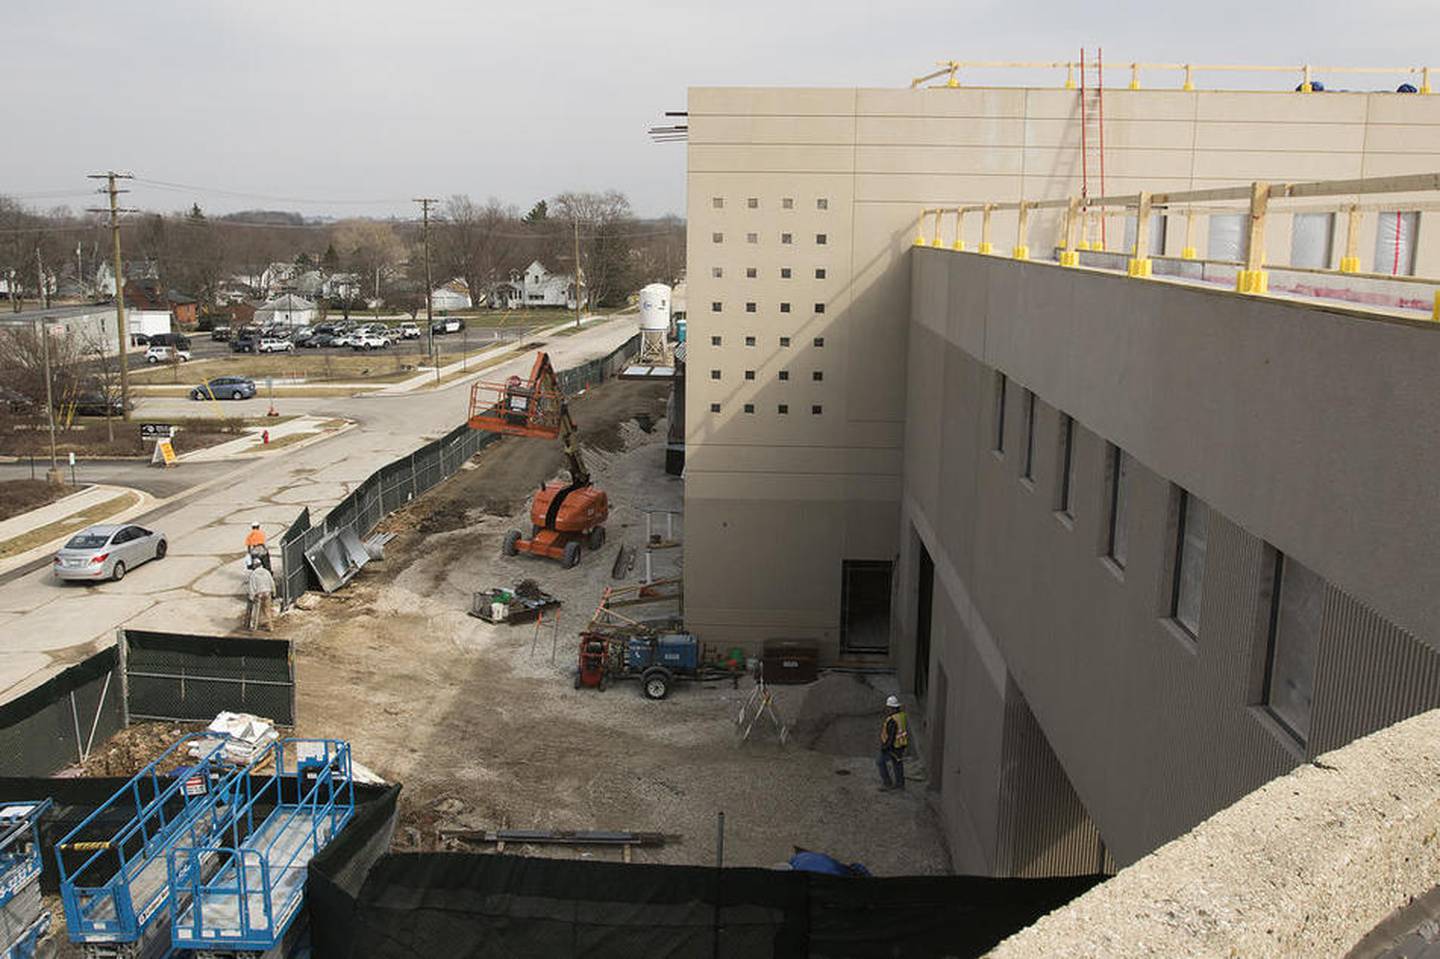 DeKalb County Jail expansion project remains on track for 2018